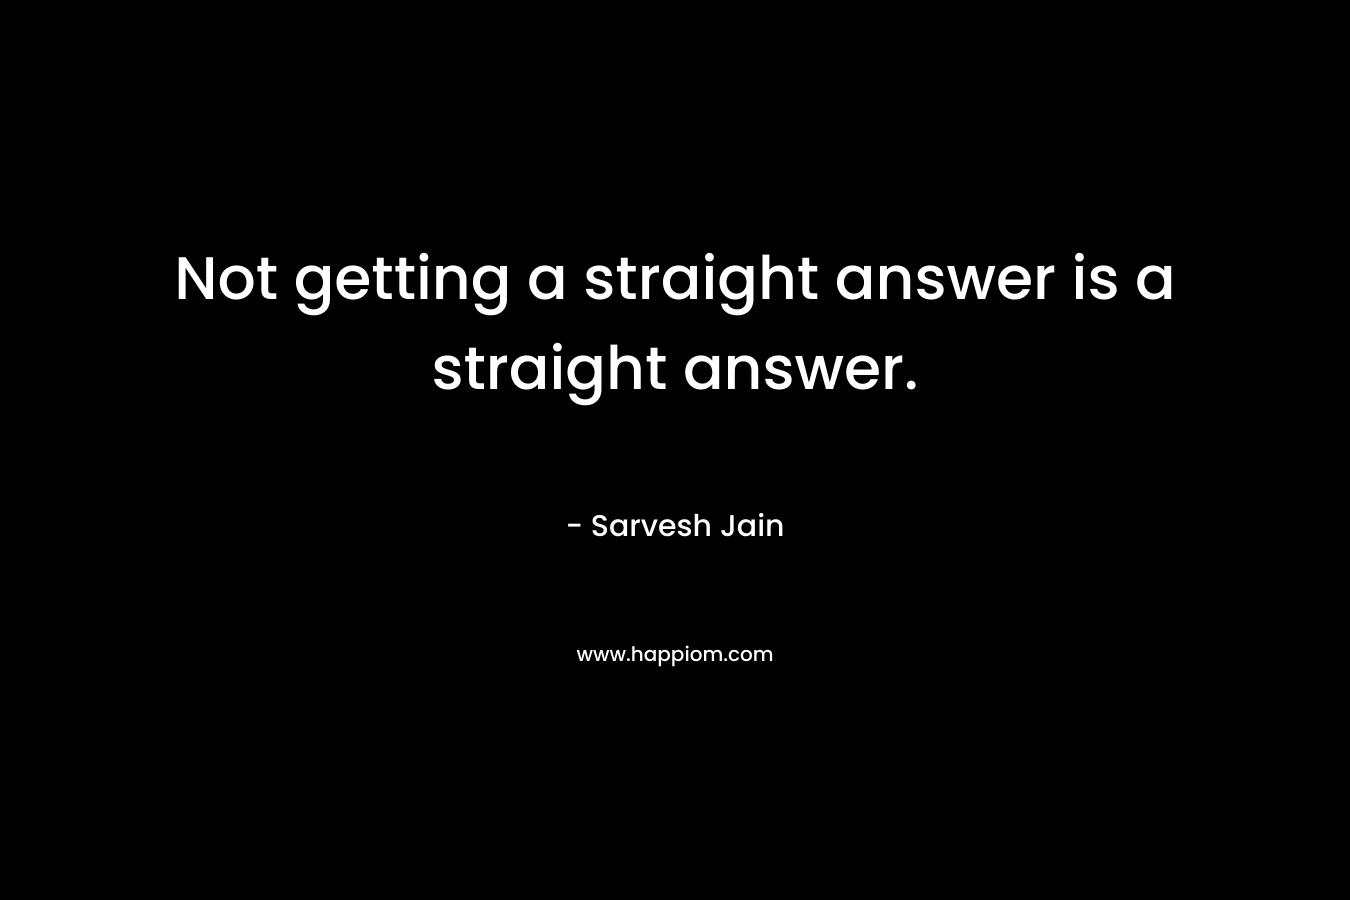 Not getting a straight answer is a straight answer.